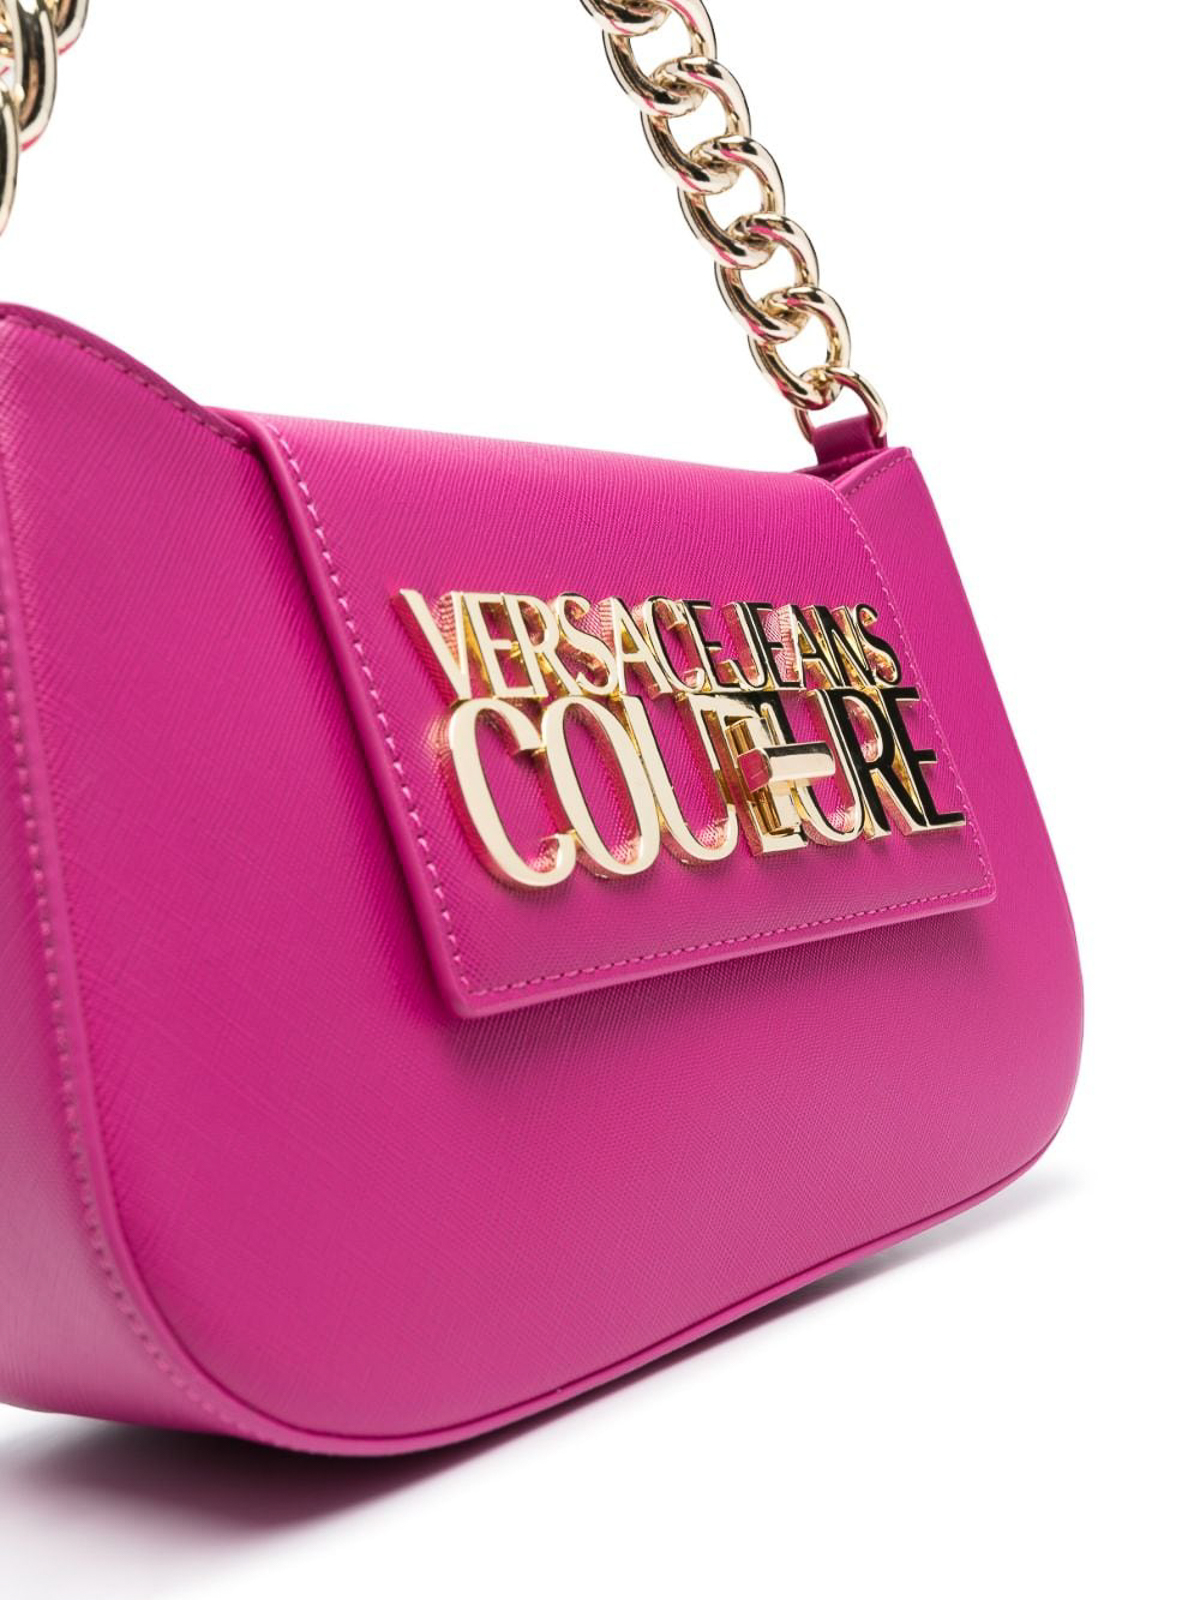 Versace Jeans Couture logo-lettering Crossbody Bag - Pink